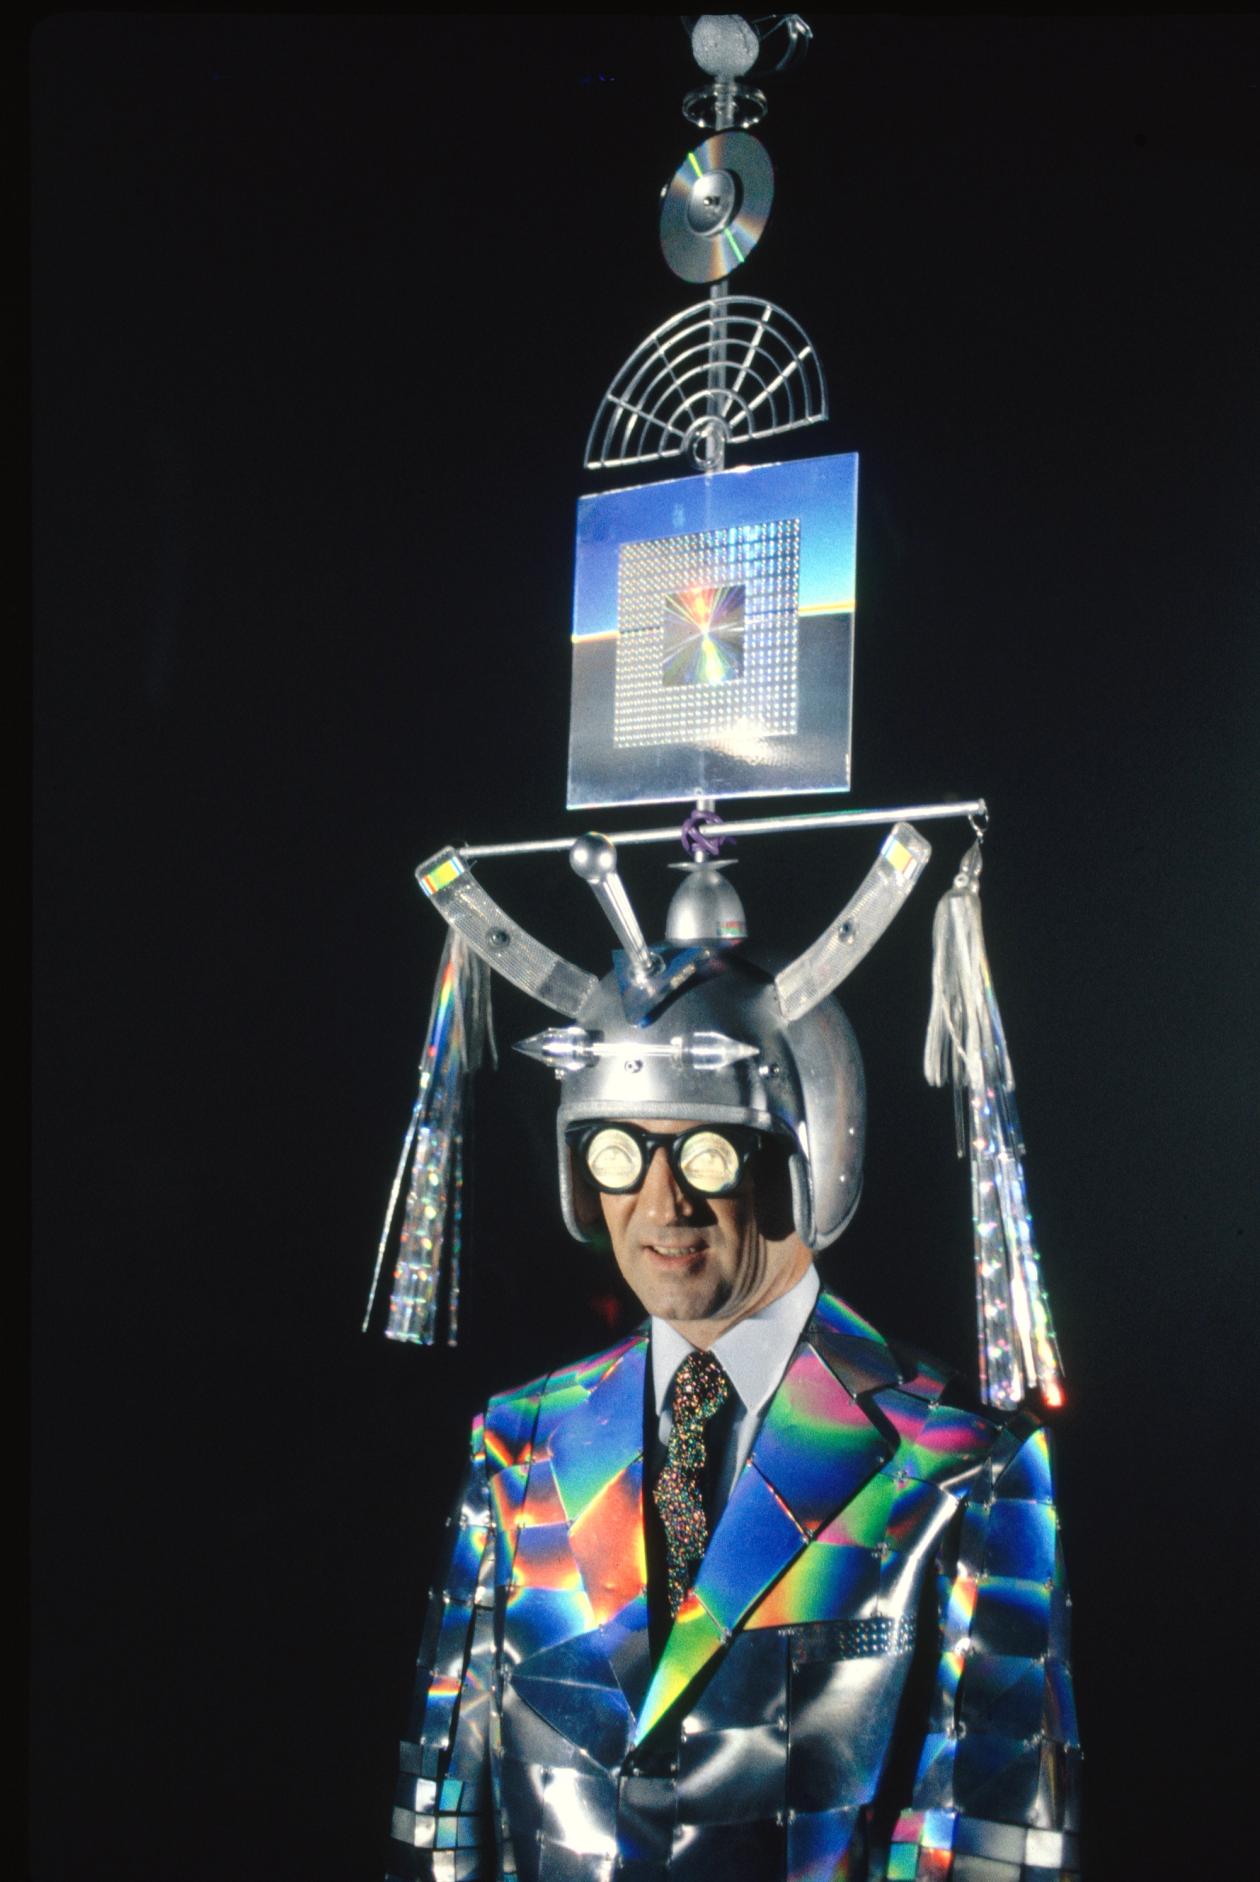 A figure wearing a large silver headpiece, black rimmed glasses and a navy suit with a rainbow gradient pattern.